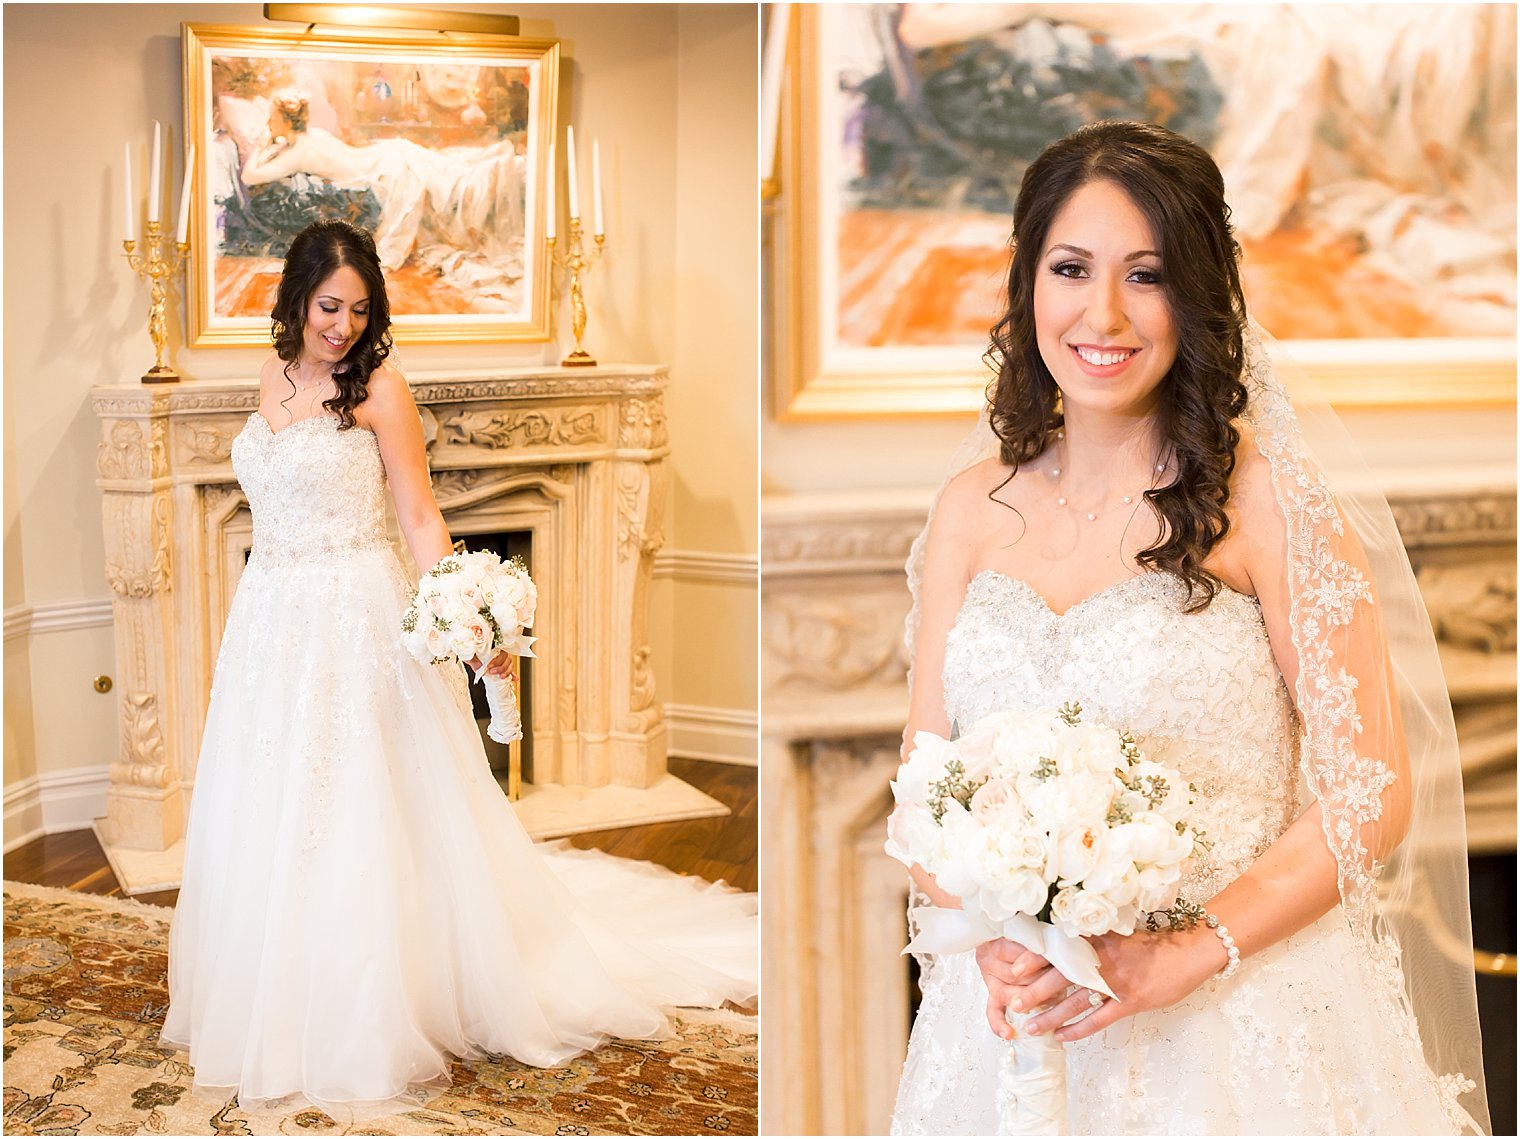 Gorgeous classic bridal portraits at Nanina's in the park bridal suite | Photo by Idalia Photography